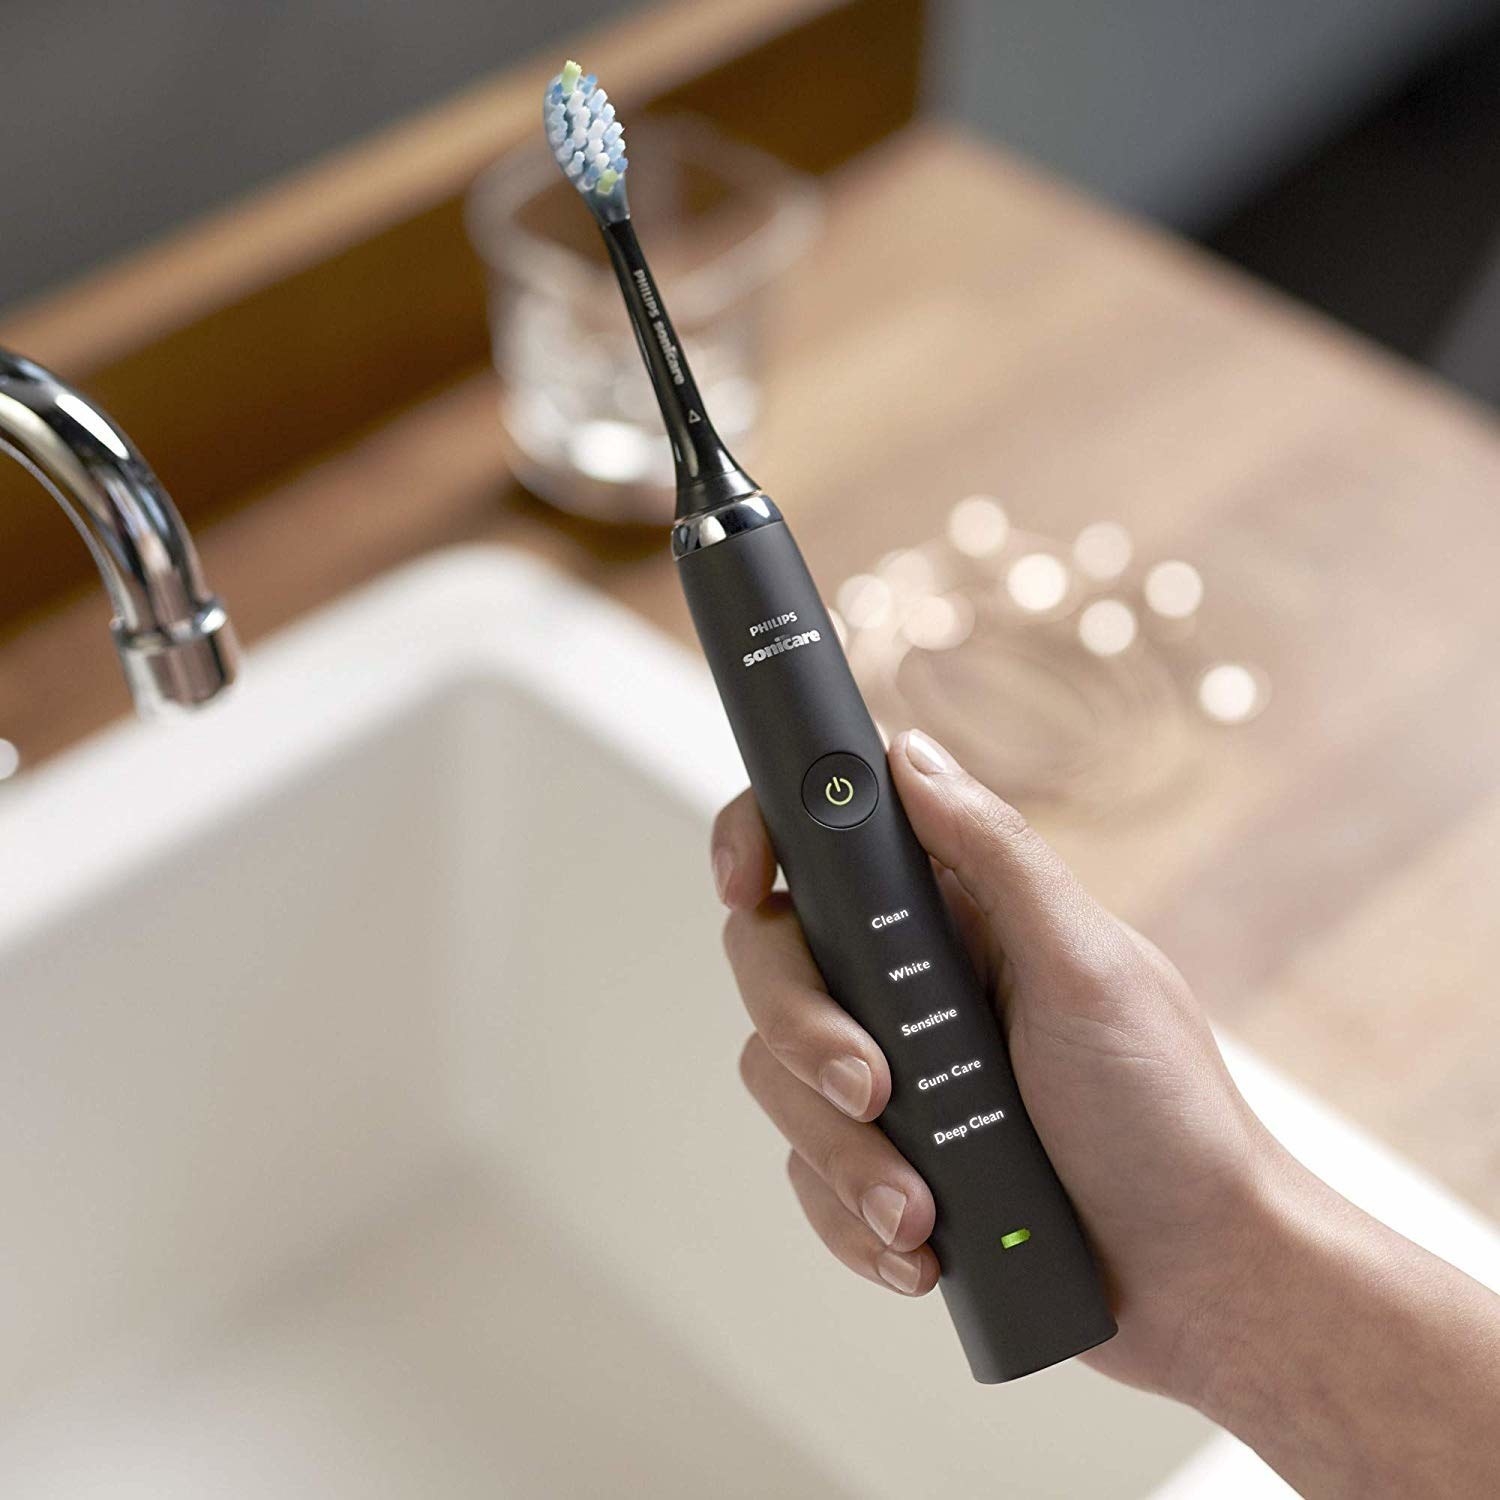 The electric toothbrush in black